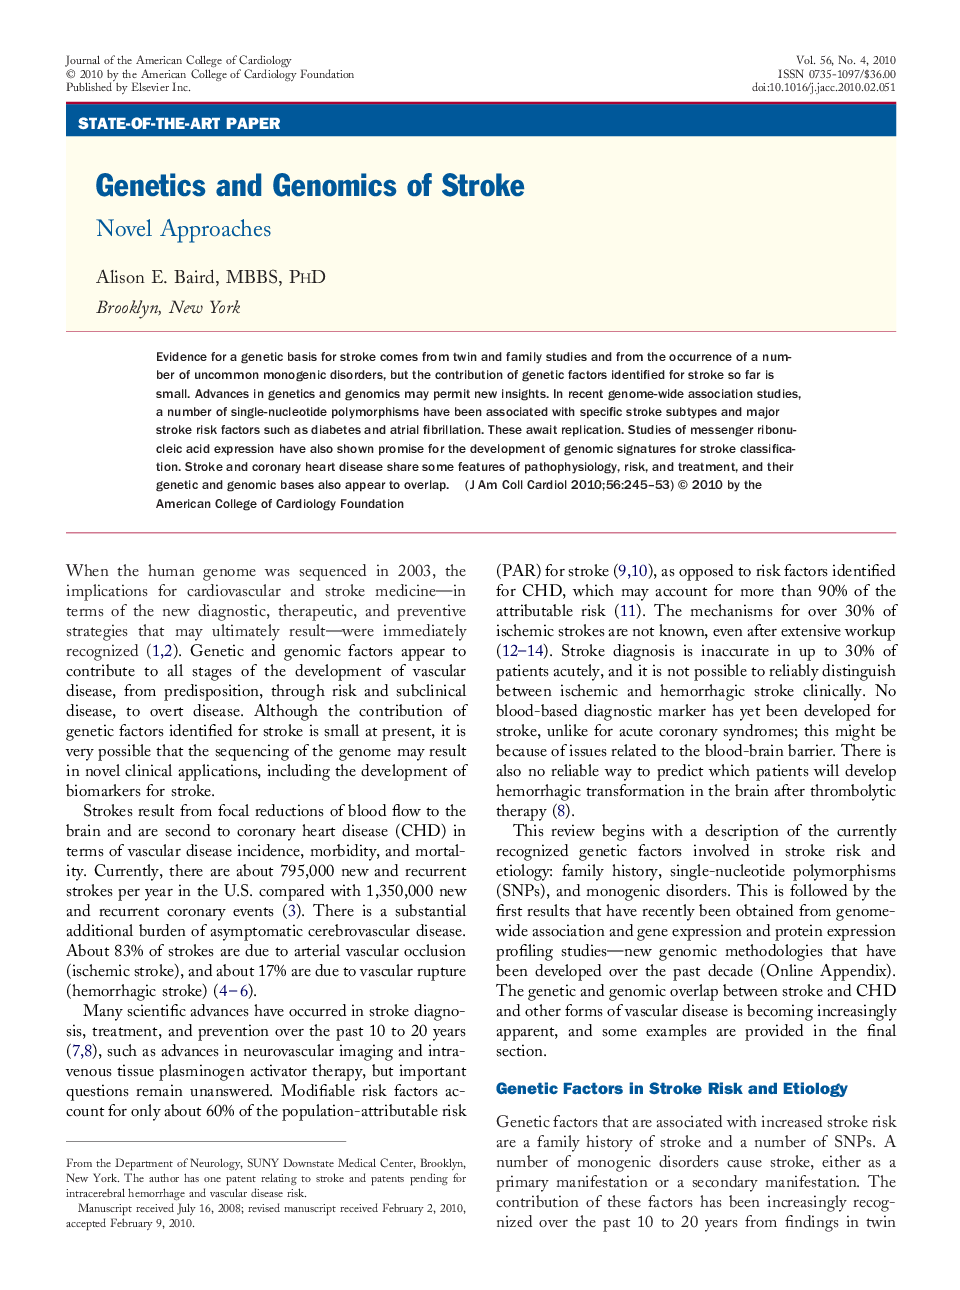 Genetics and Genomics of Stroke : Novel Approaches